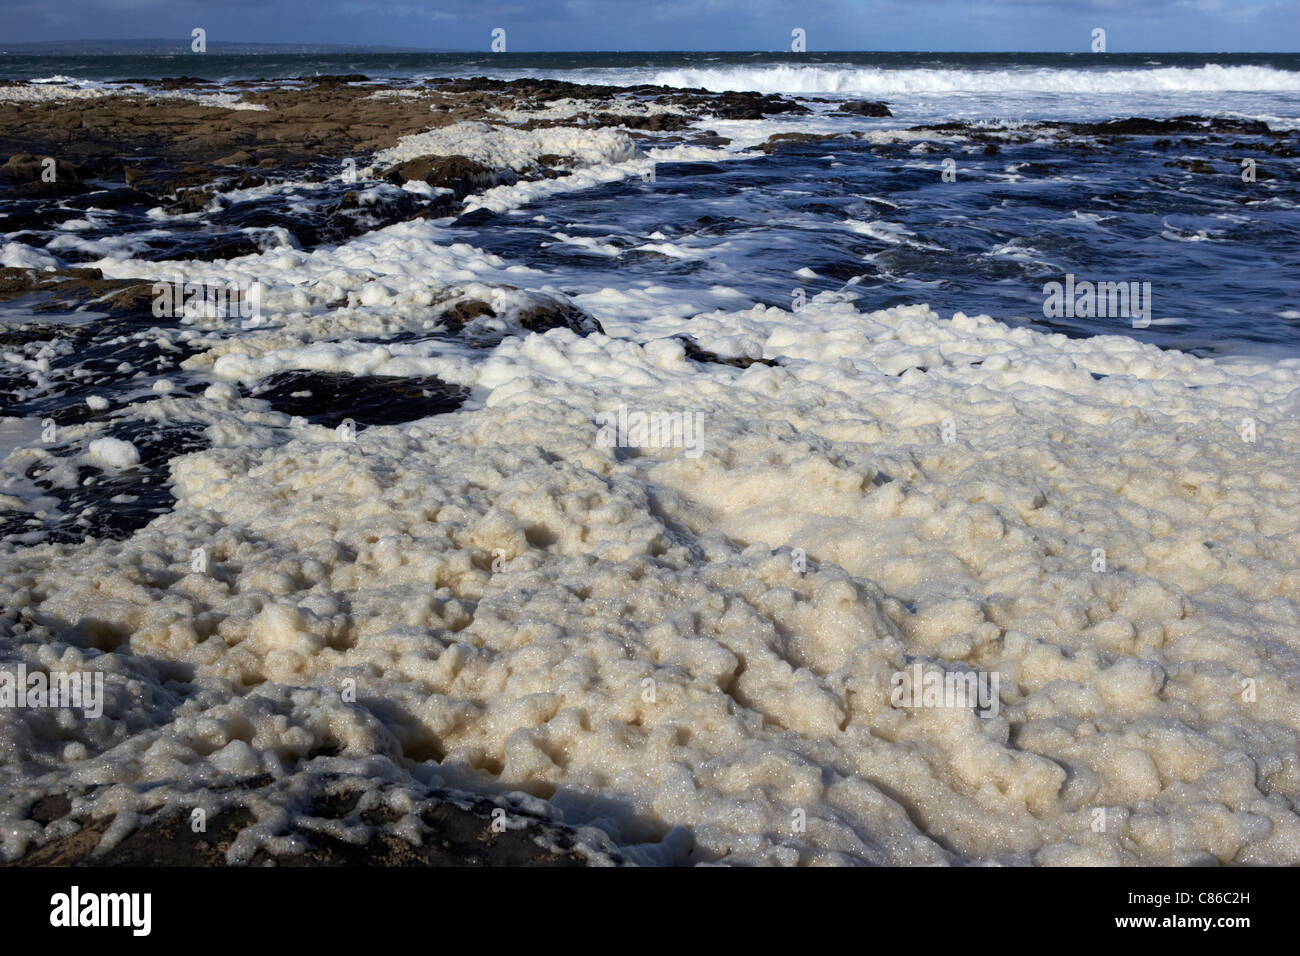 naturally occuring phaeocystis algae foam created by wave and wind action off the west coast of ireland Stock Photo